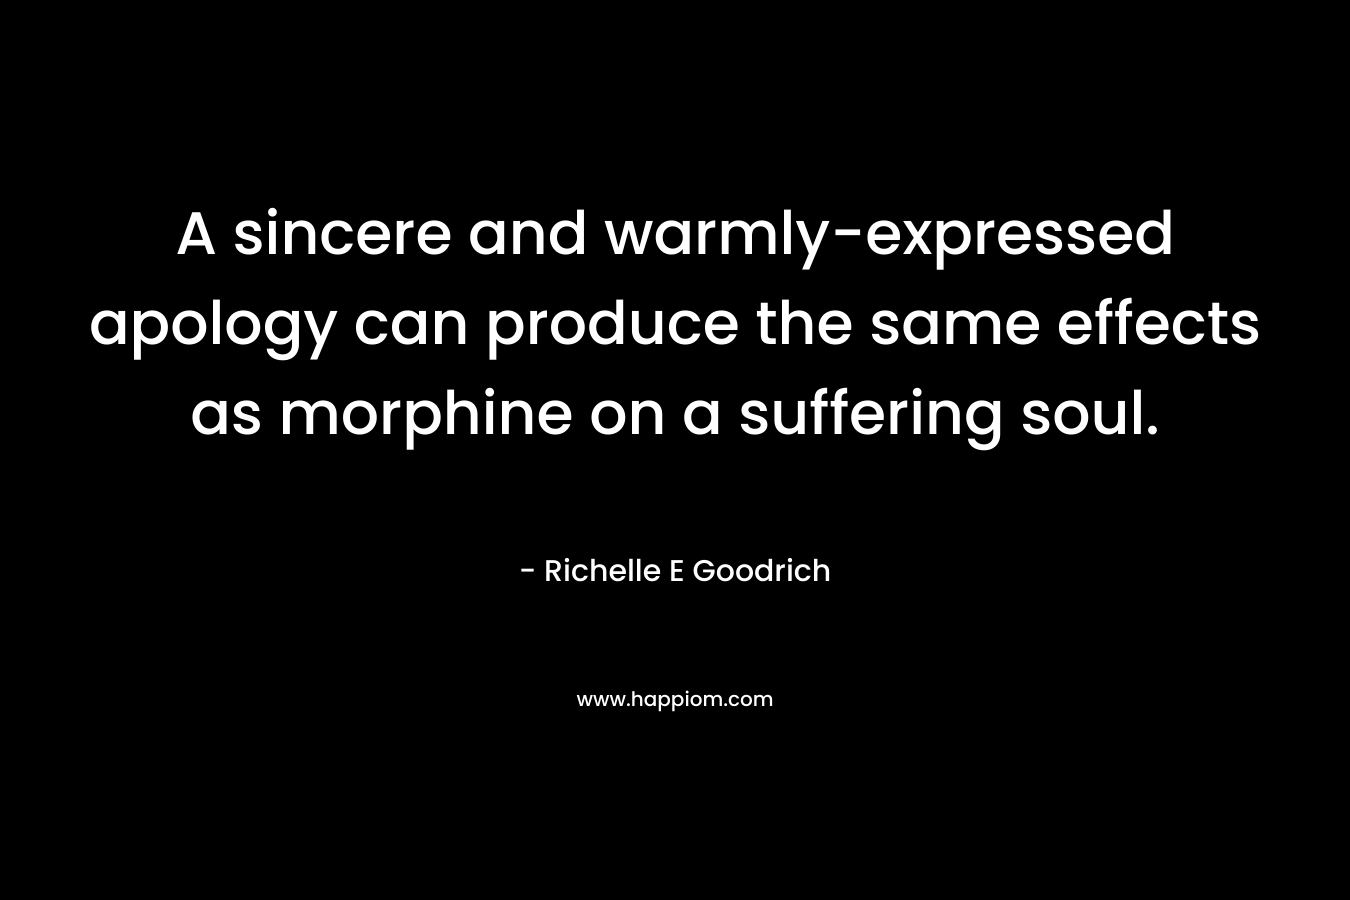 A sincere and warmly-expressed apology can produce the same effects as morphine on a suffering soul.